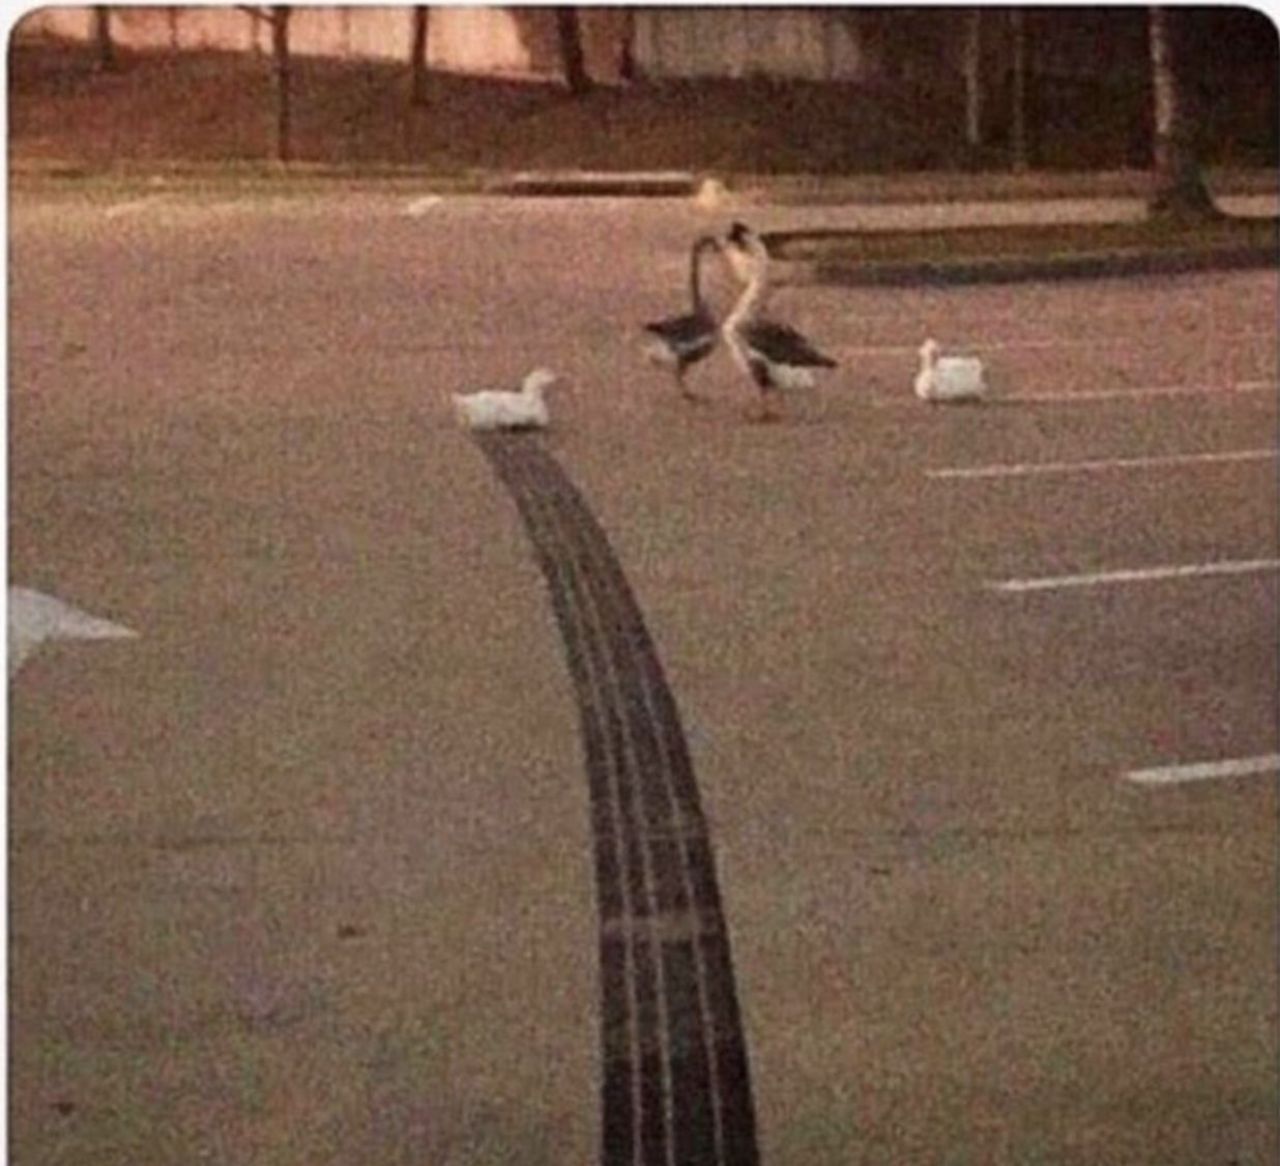 How fast was that duck going